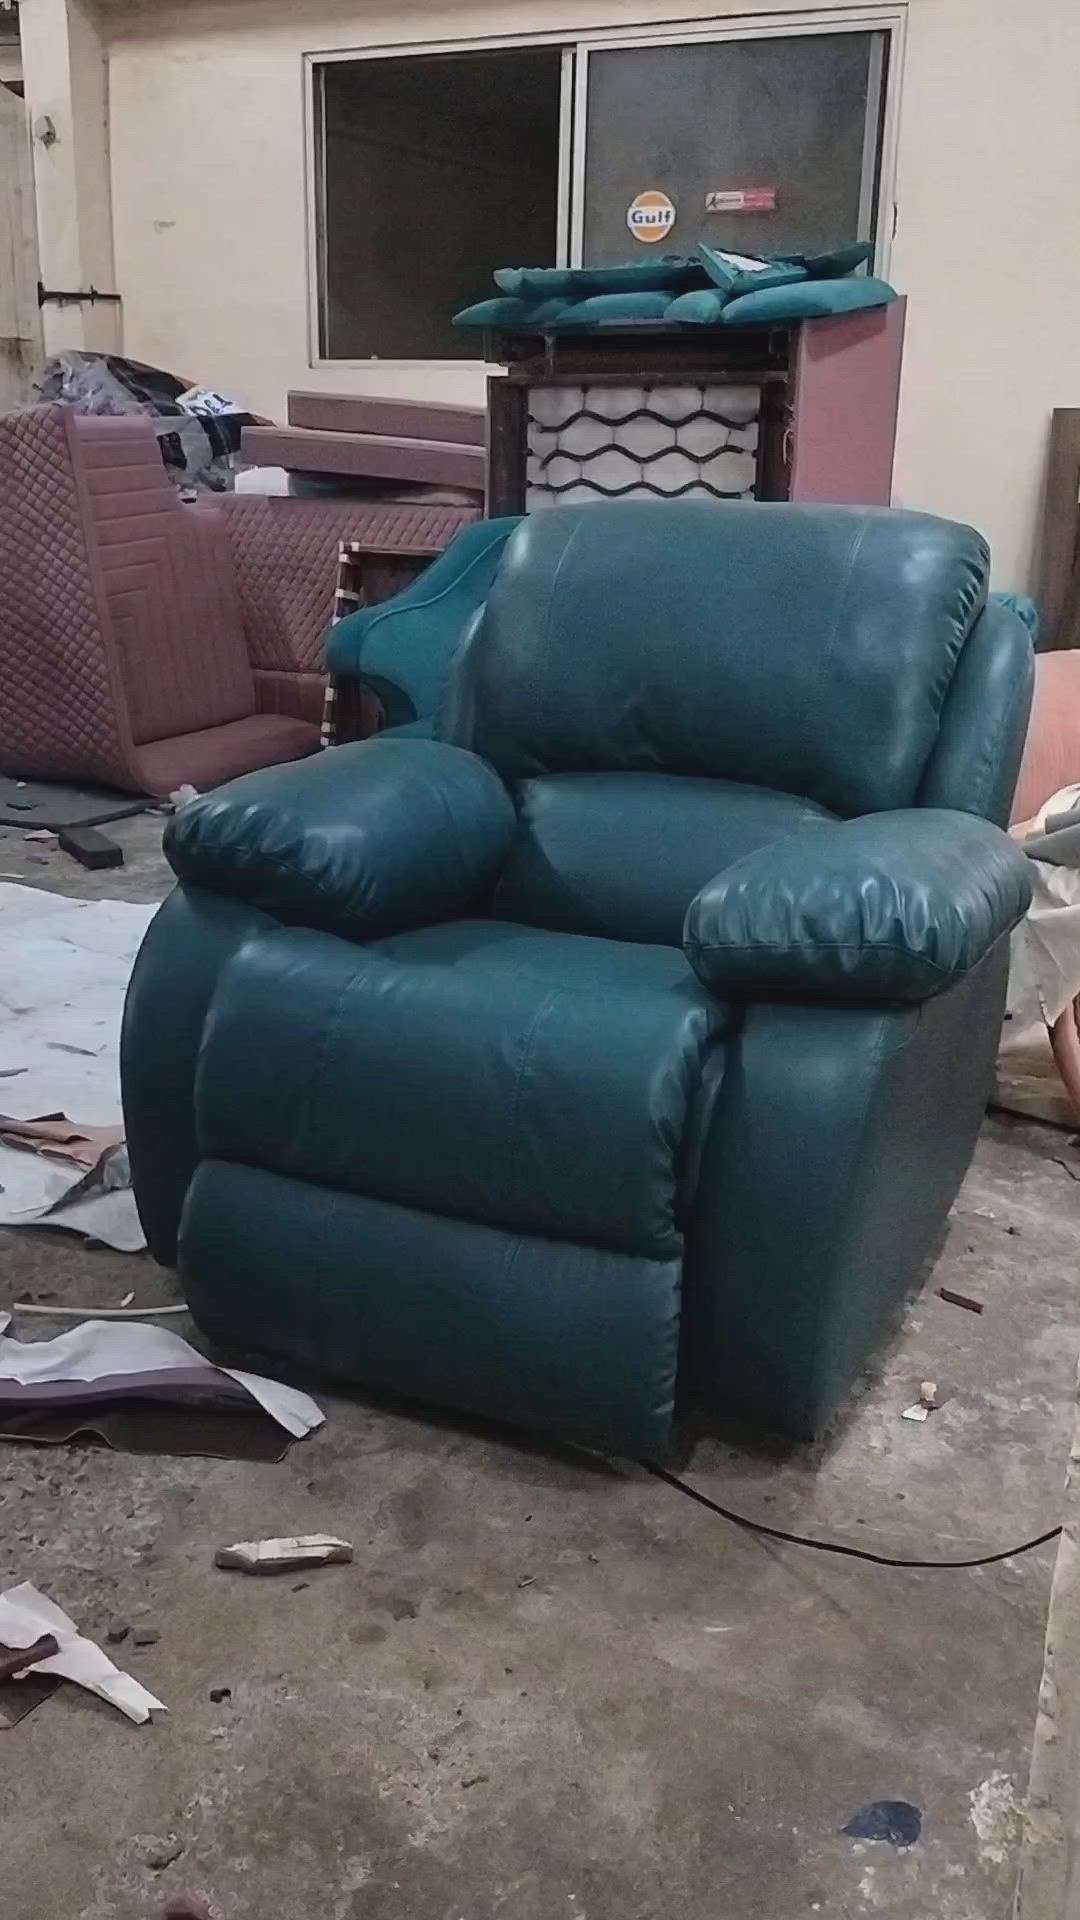 #recliners